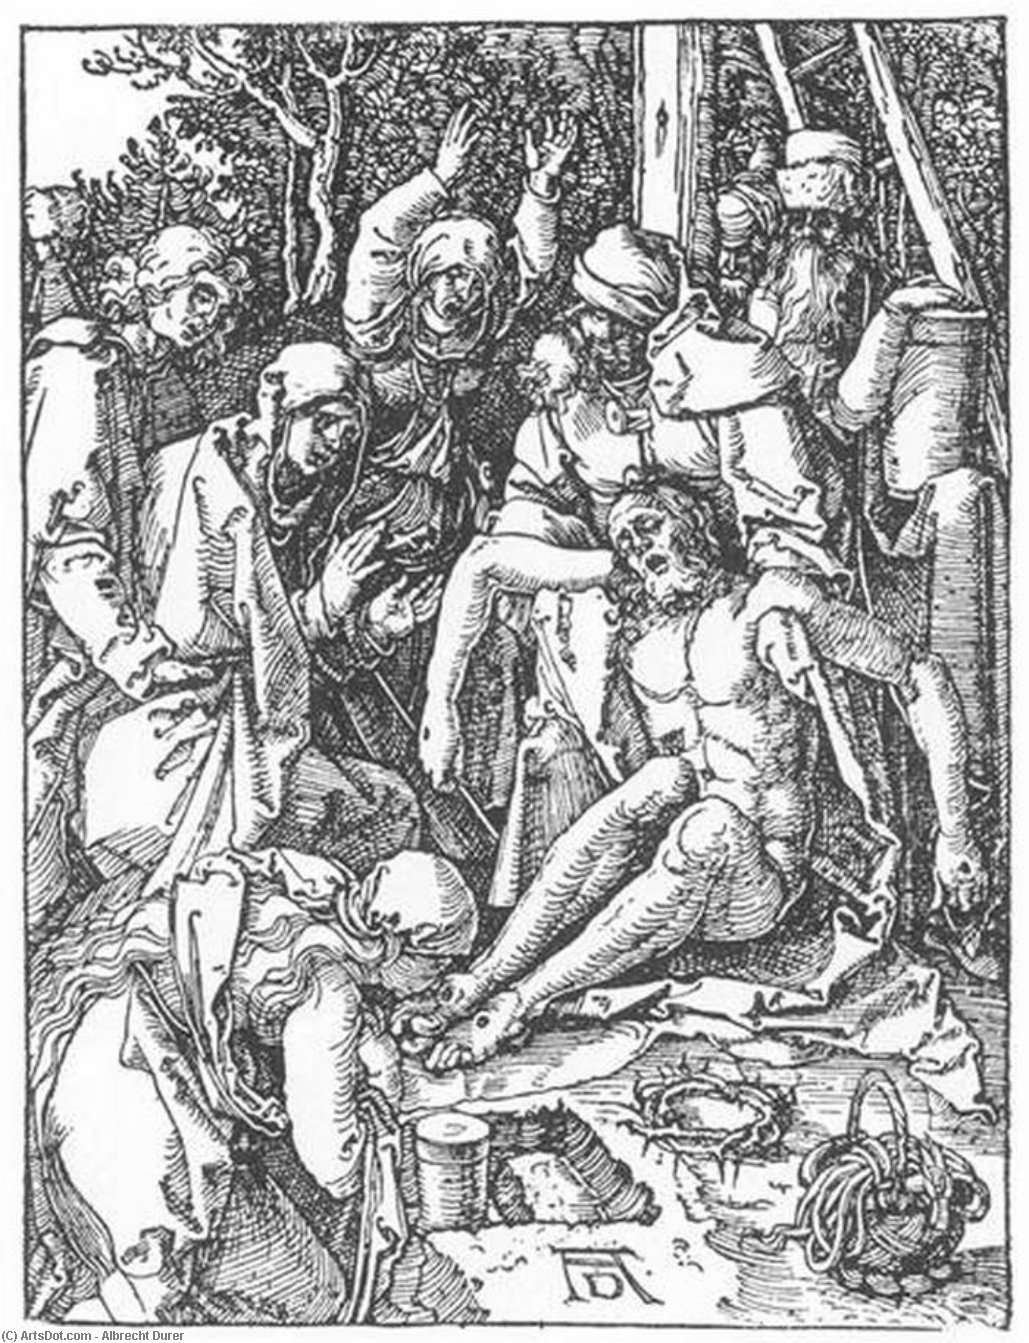 WikiOO.org - 백과 사전 - 회화, 삽화 Albrecht Durer - Small Passion: 27. The Lamentation for Christ